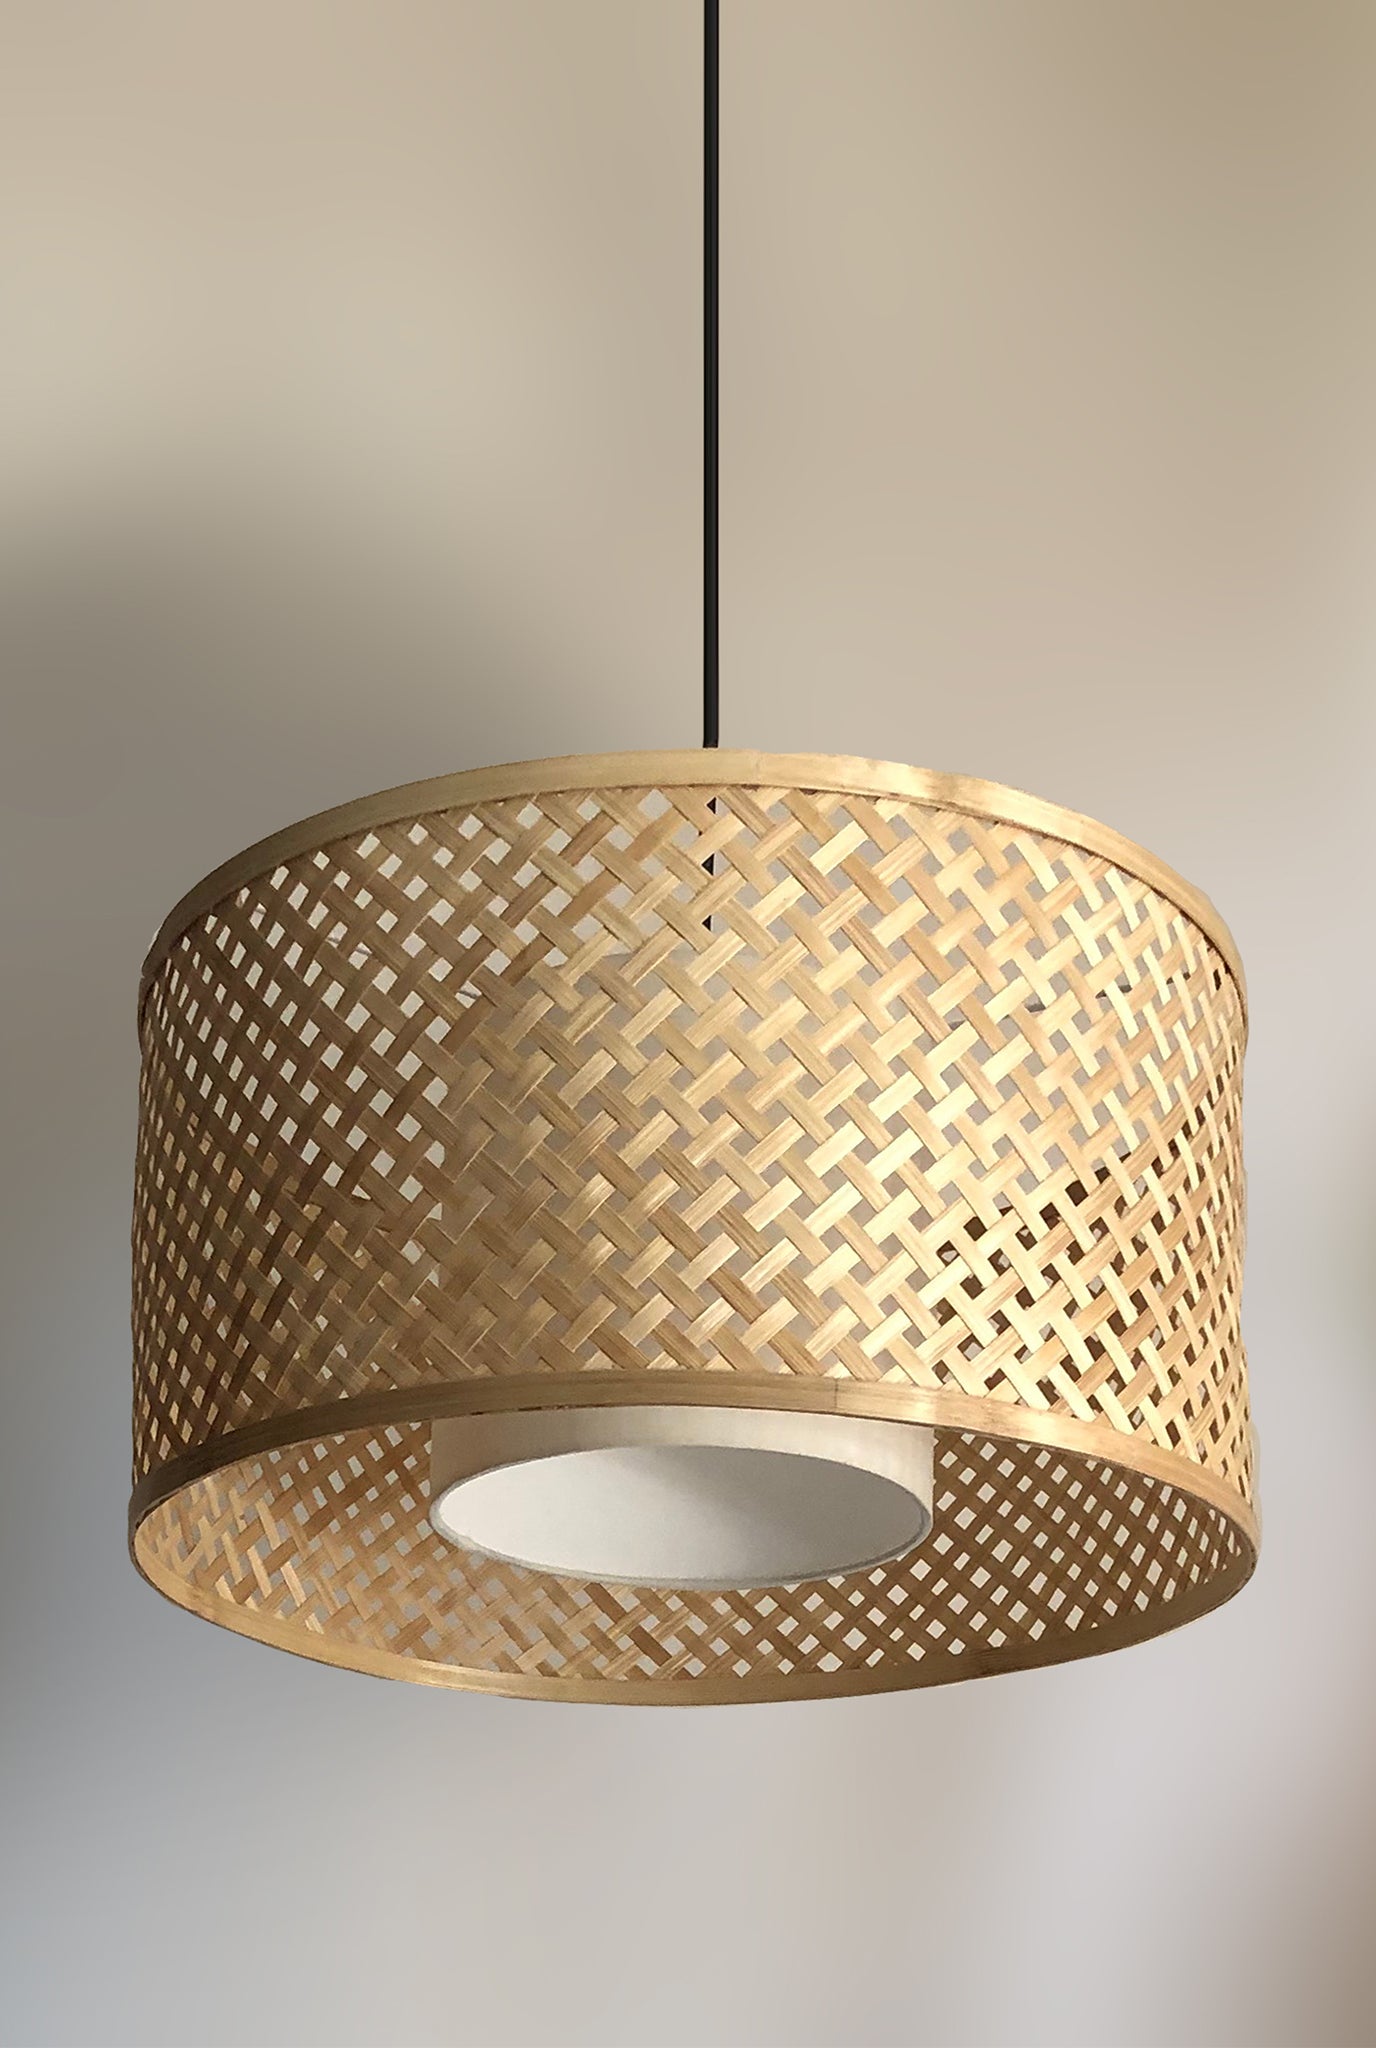 lamp-handcrafted-lights-bamboo-pendant-lamp